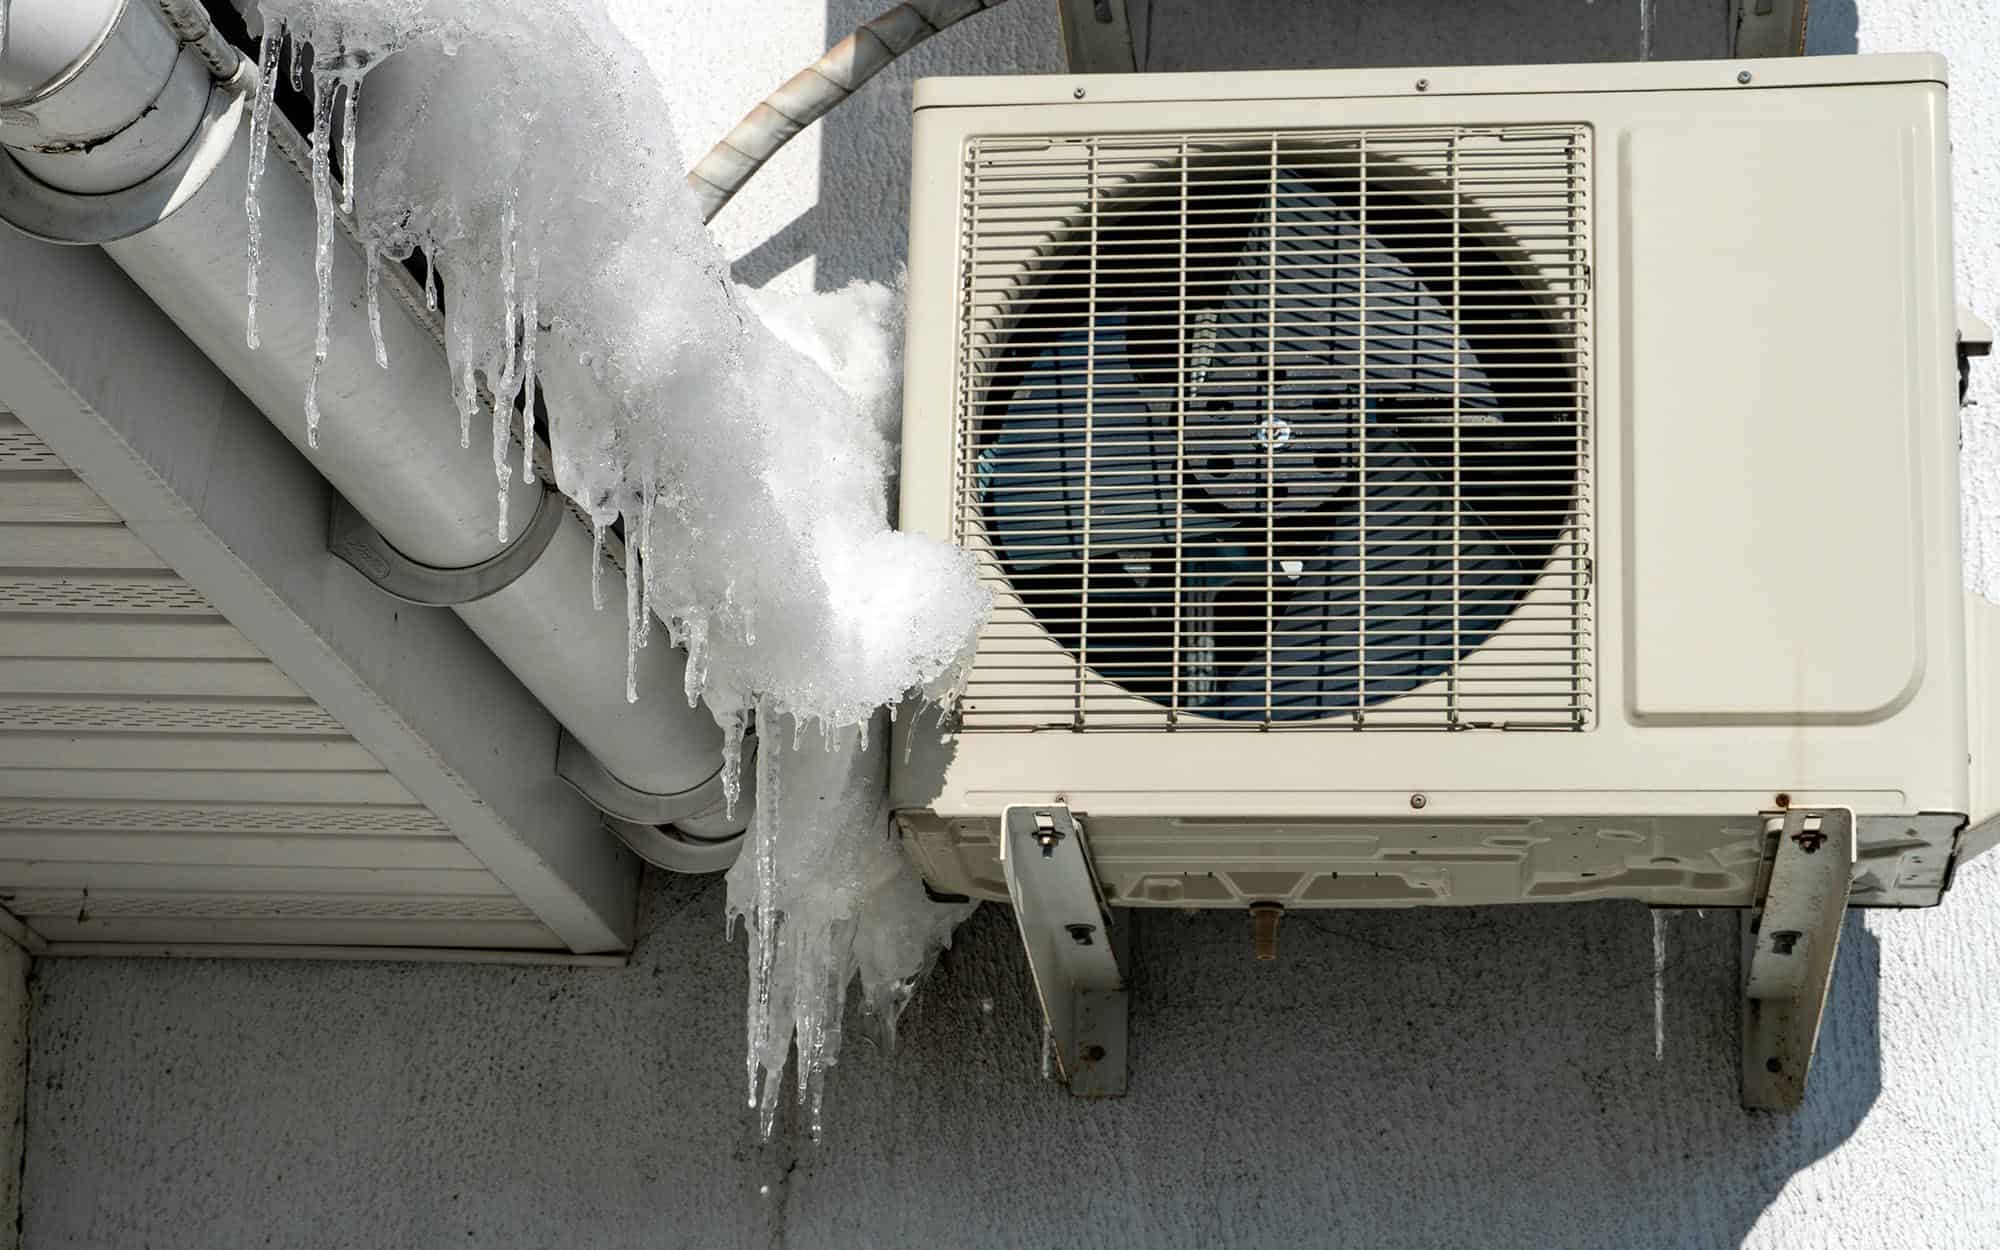 AC unit covered in ice